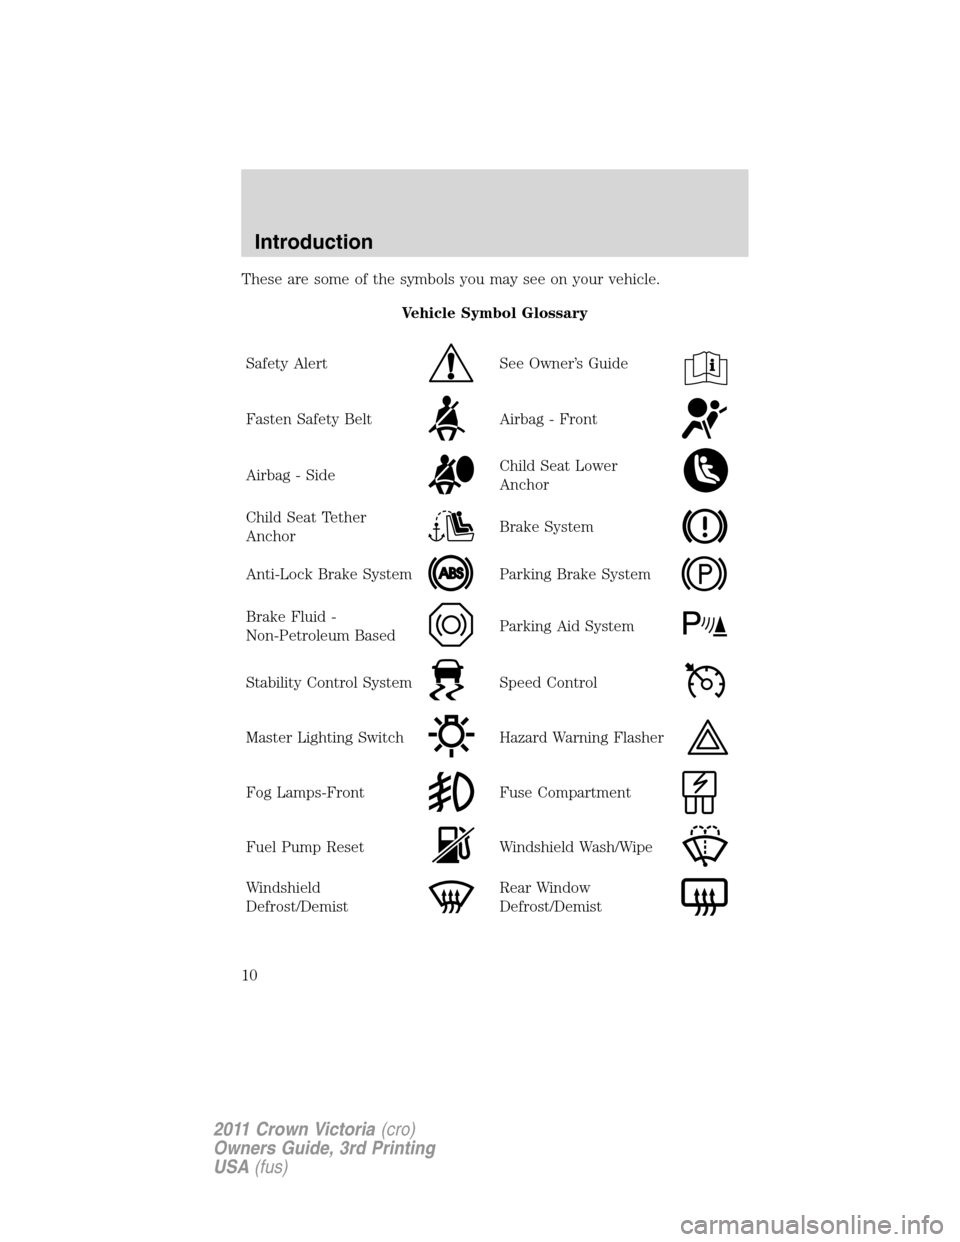 Mercury Grand Marquis 1011  Owners Manuals These are some of the symbols you may see on your vehicle.
Vehicle Symbol Glossary
Safety Alert
See Owner’s Guide
Fasten Safety BeltAirbag - Front
Airbag - SideChild Seat Lower
Anchor
Child Seat Tet